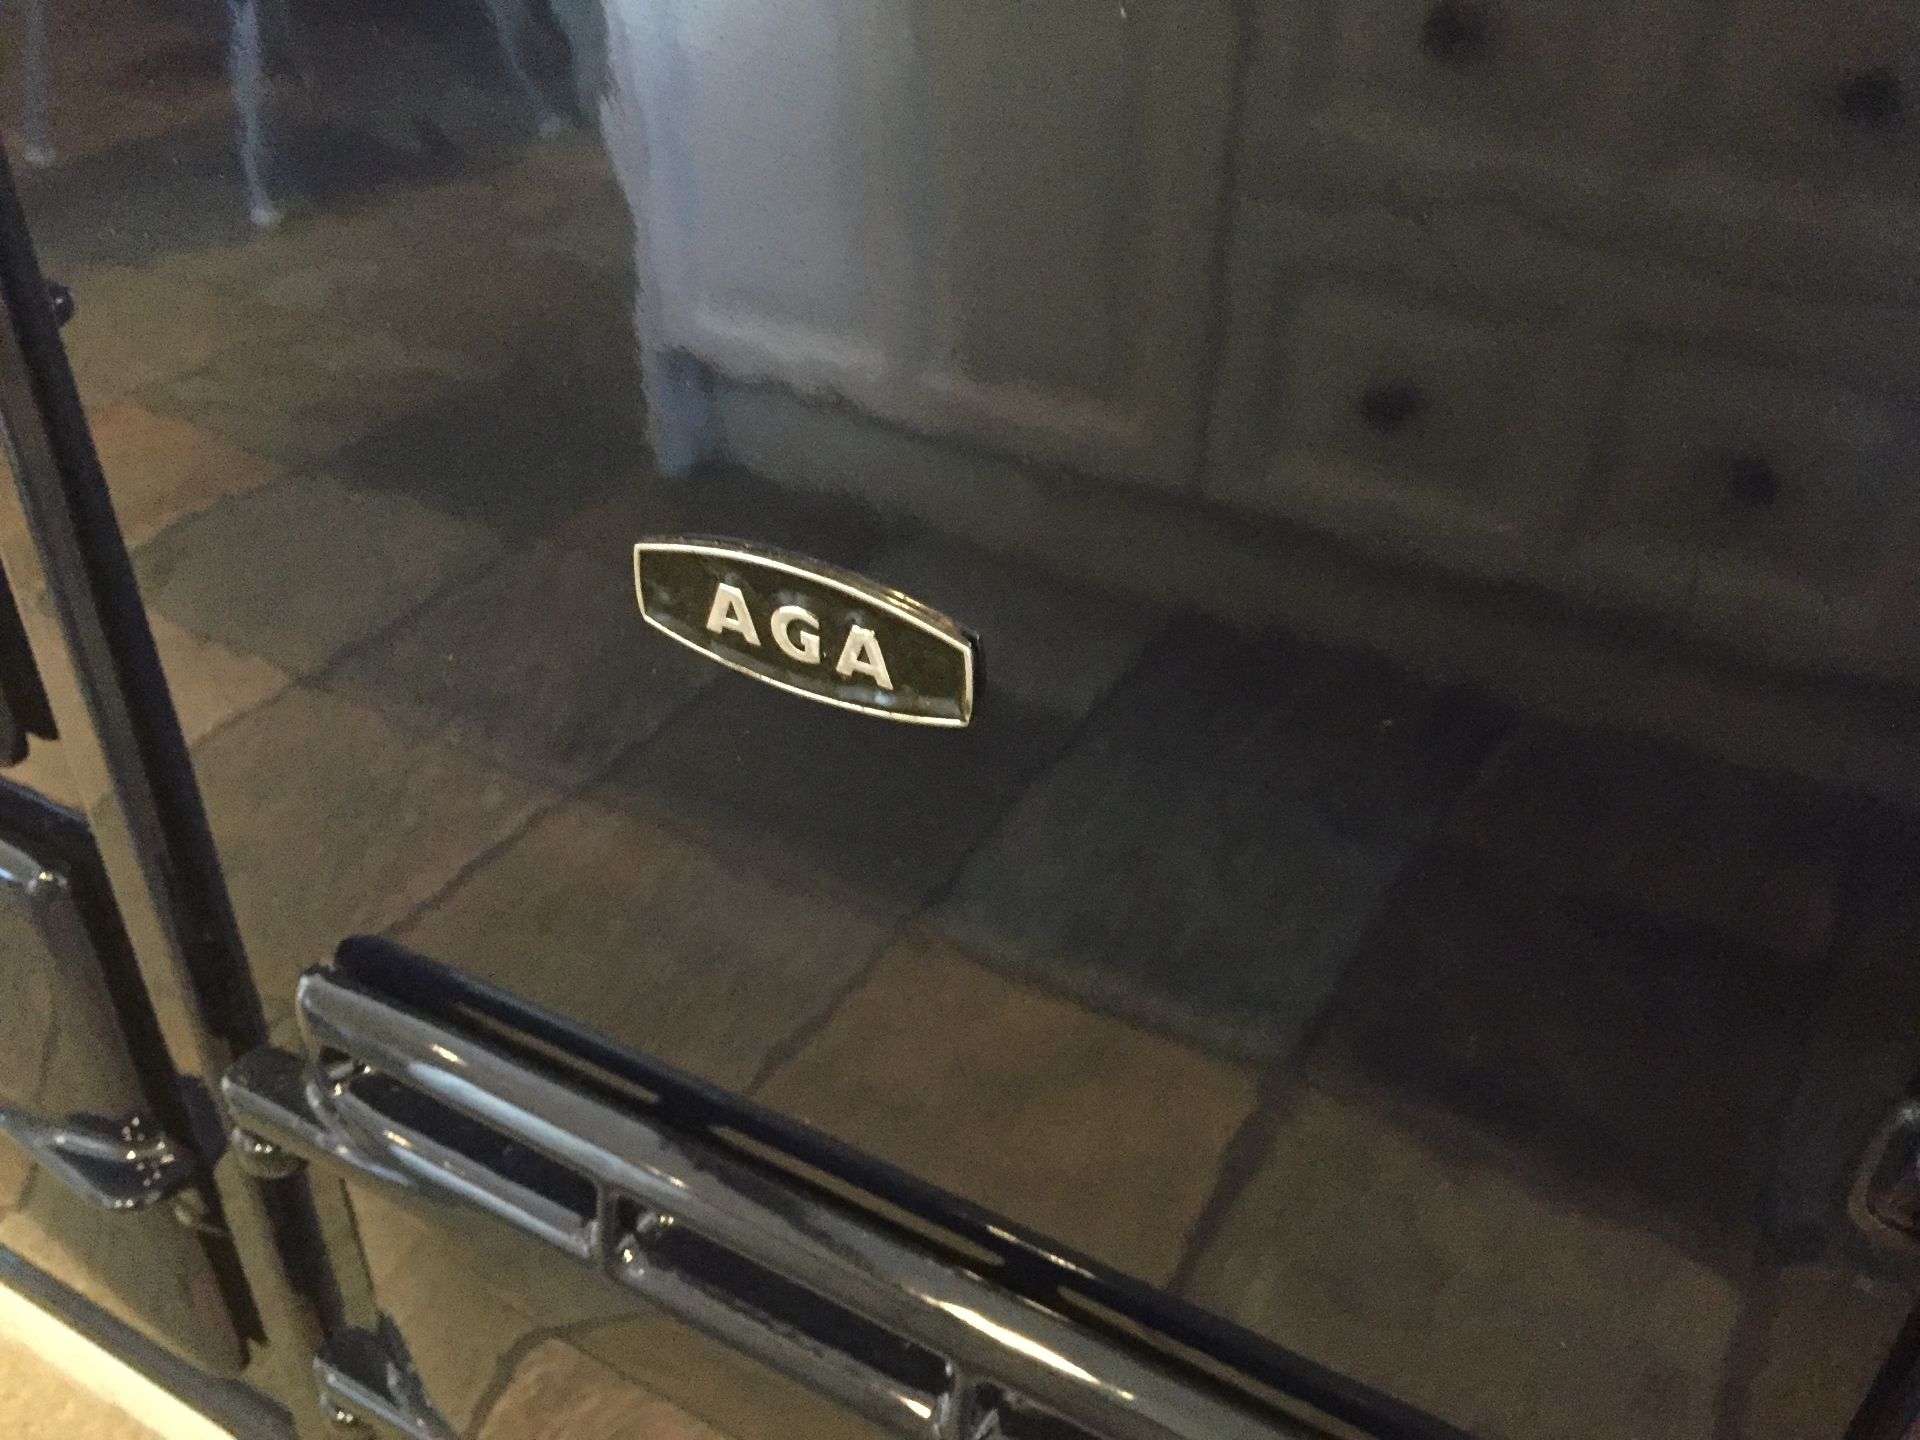 1 x Aga 4-Oven, 3-Plate Dual-Fuel Range Cooker - Cast Iron With Navy Enamel Finish With A Black - Image 4 of 21